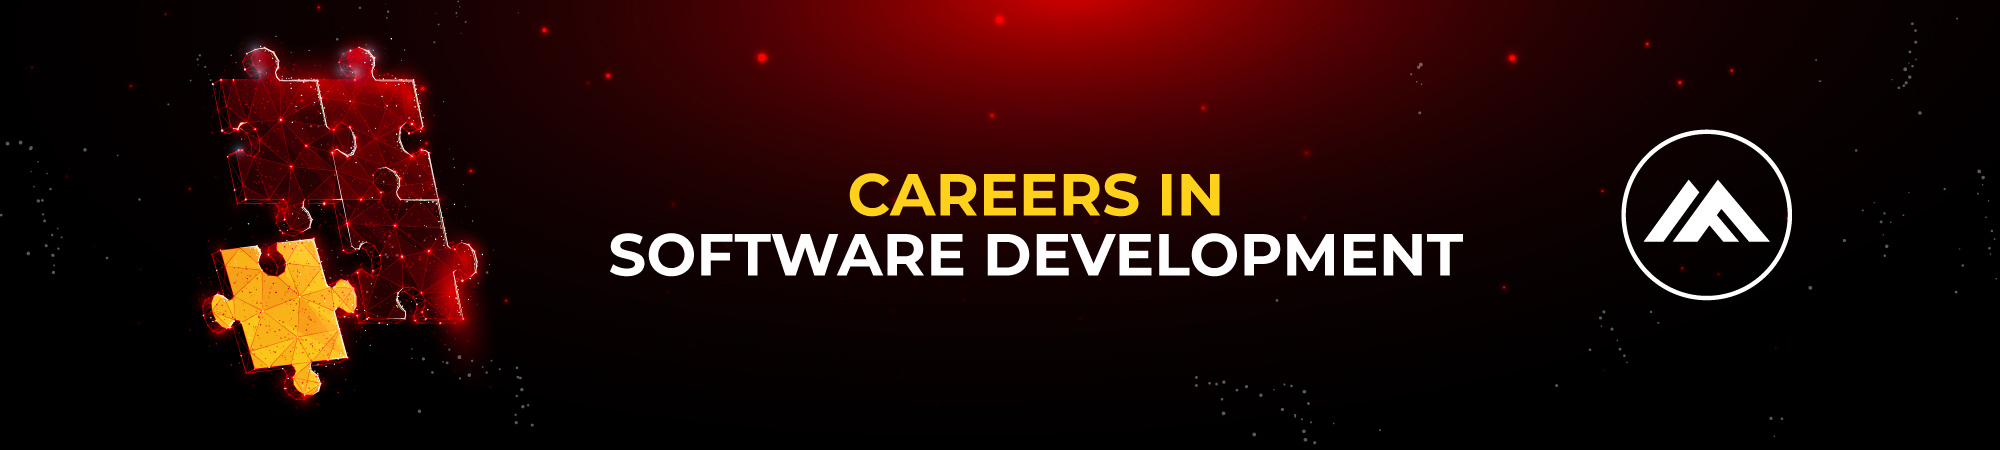 Four-piece puzzle, one of them trying to fit in followed by the text careers in software development and the company logo. Black and red background